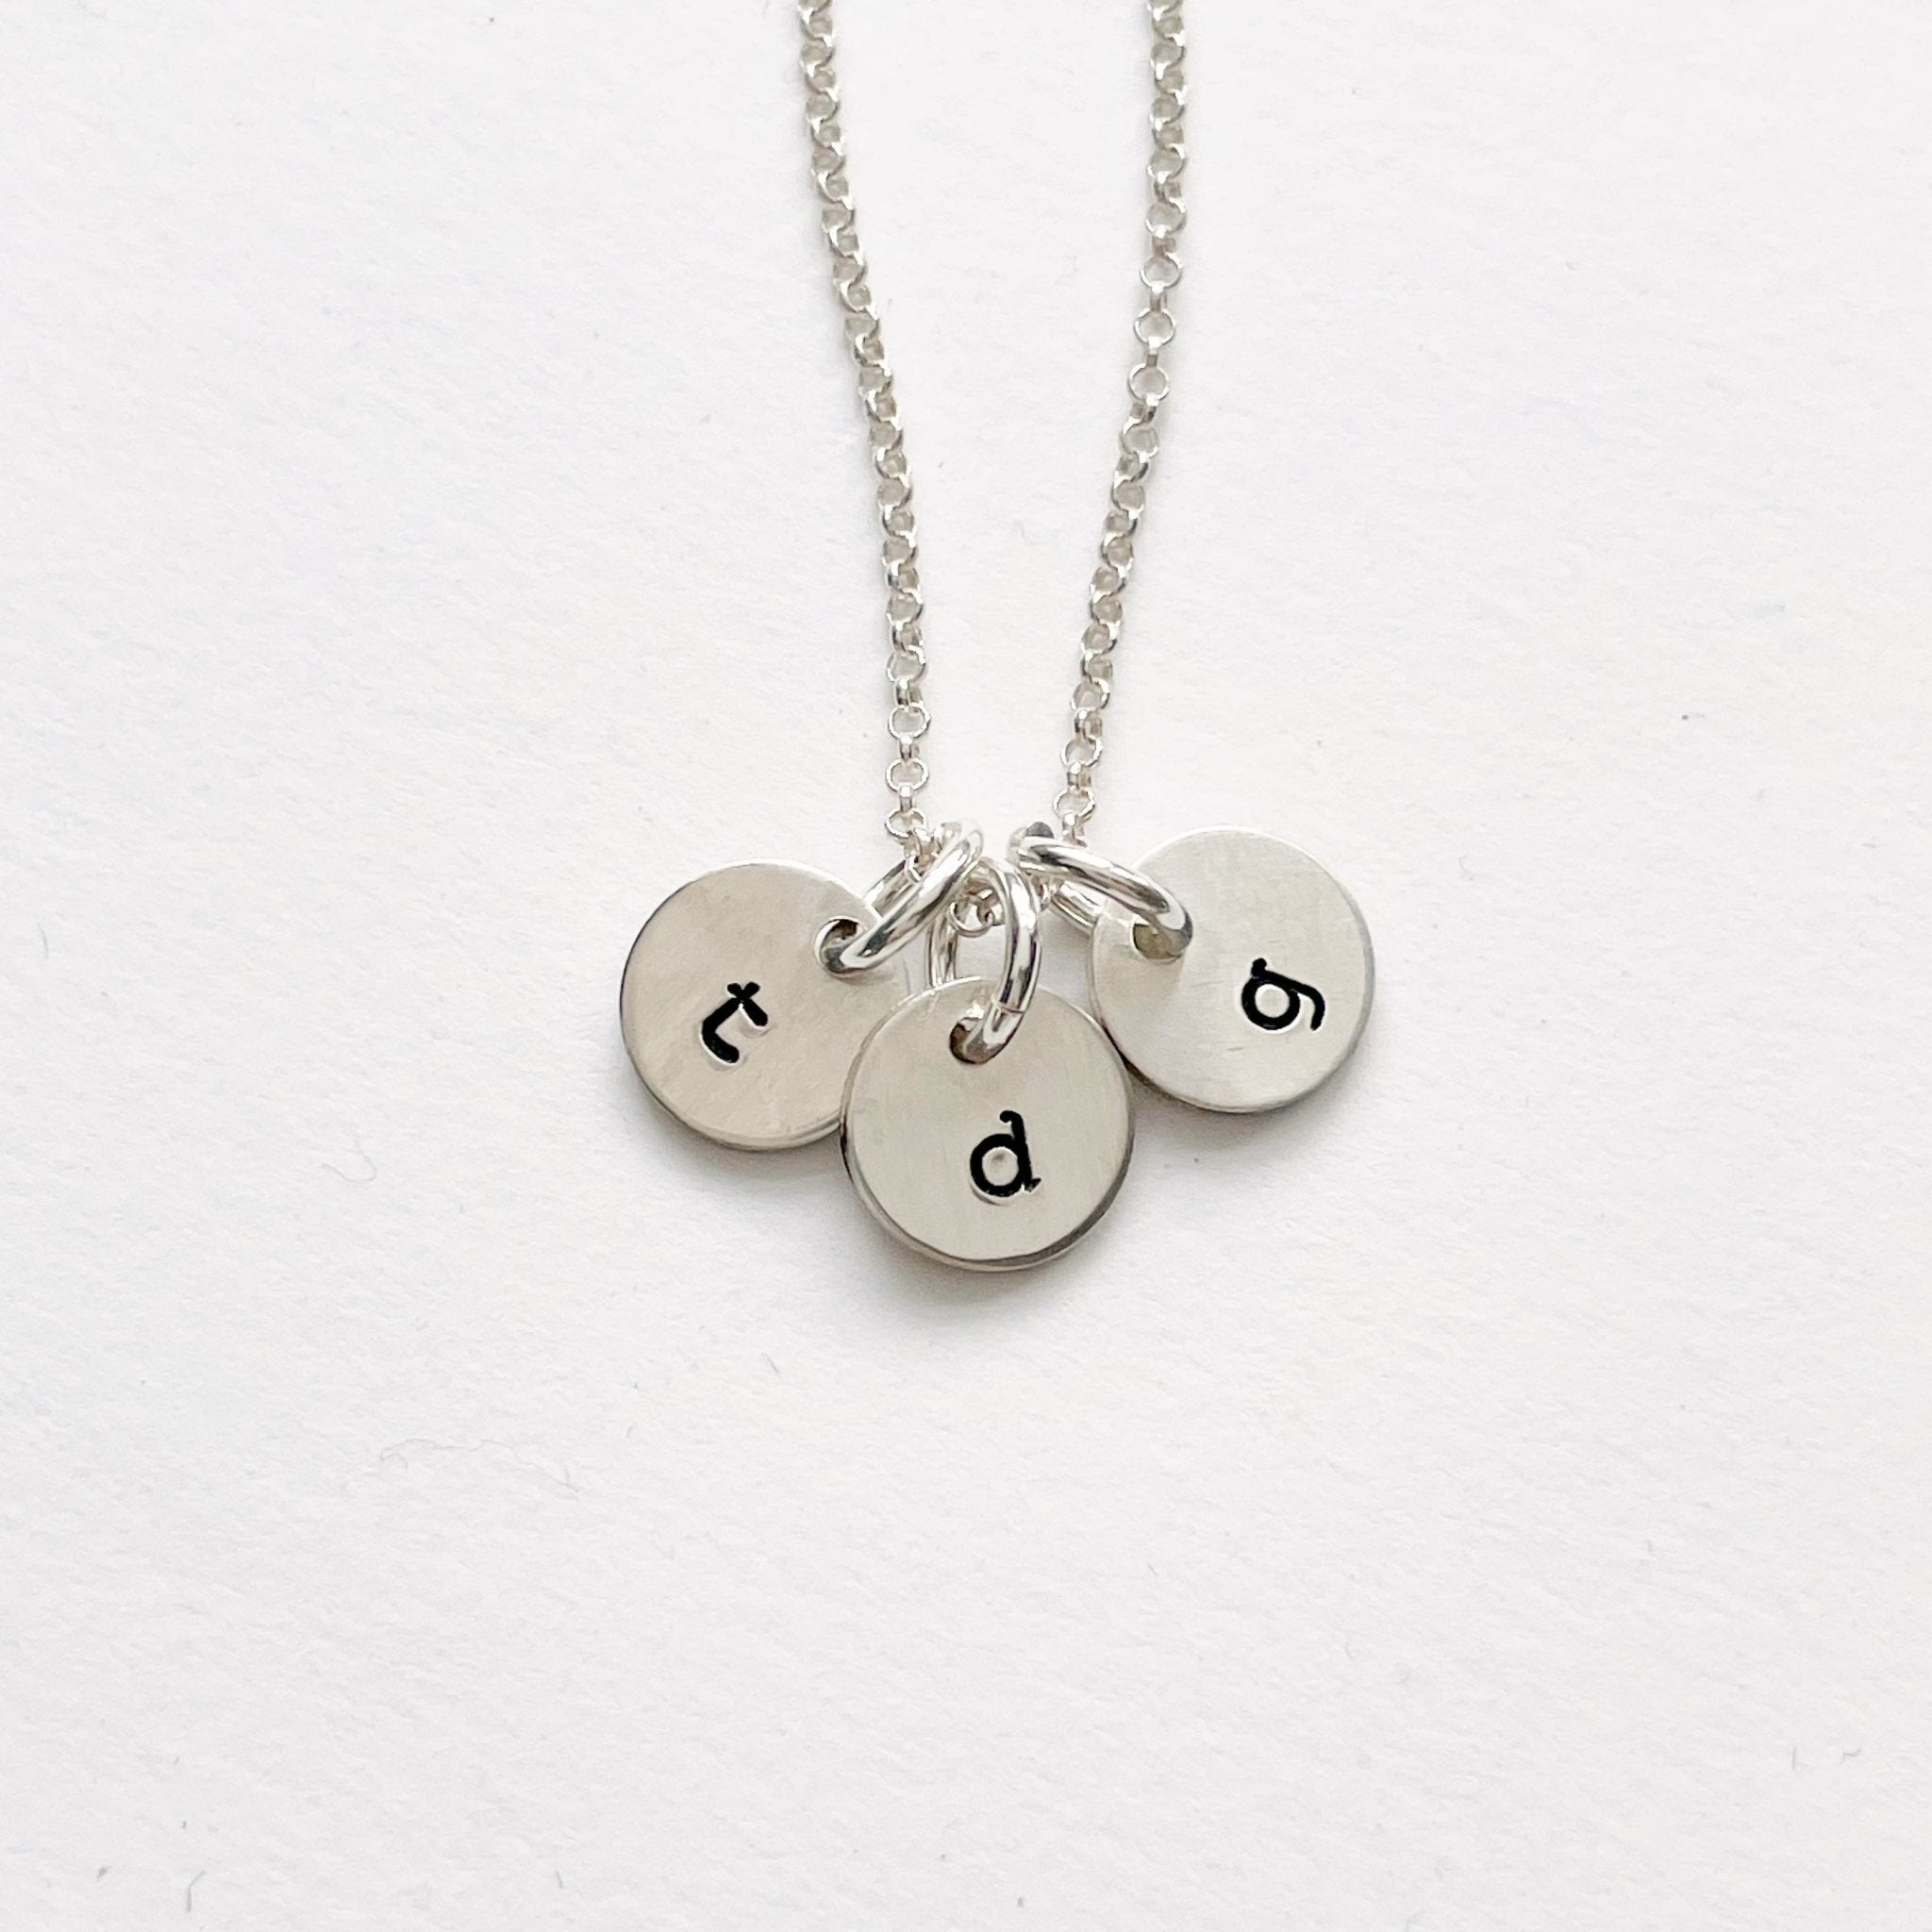 NEW diy Tiny Initial Necklace Personalized Gifts for Mothers Necklace w/  Custom Children's Initials • Personalized Gift Ideas for Her | Wish